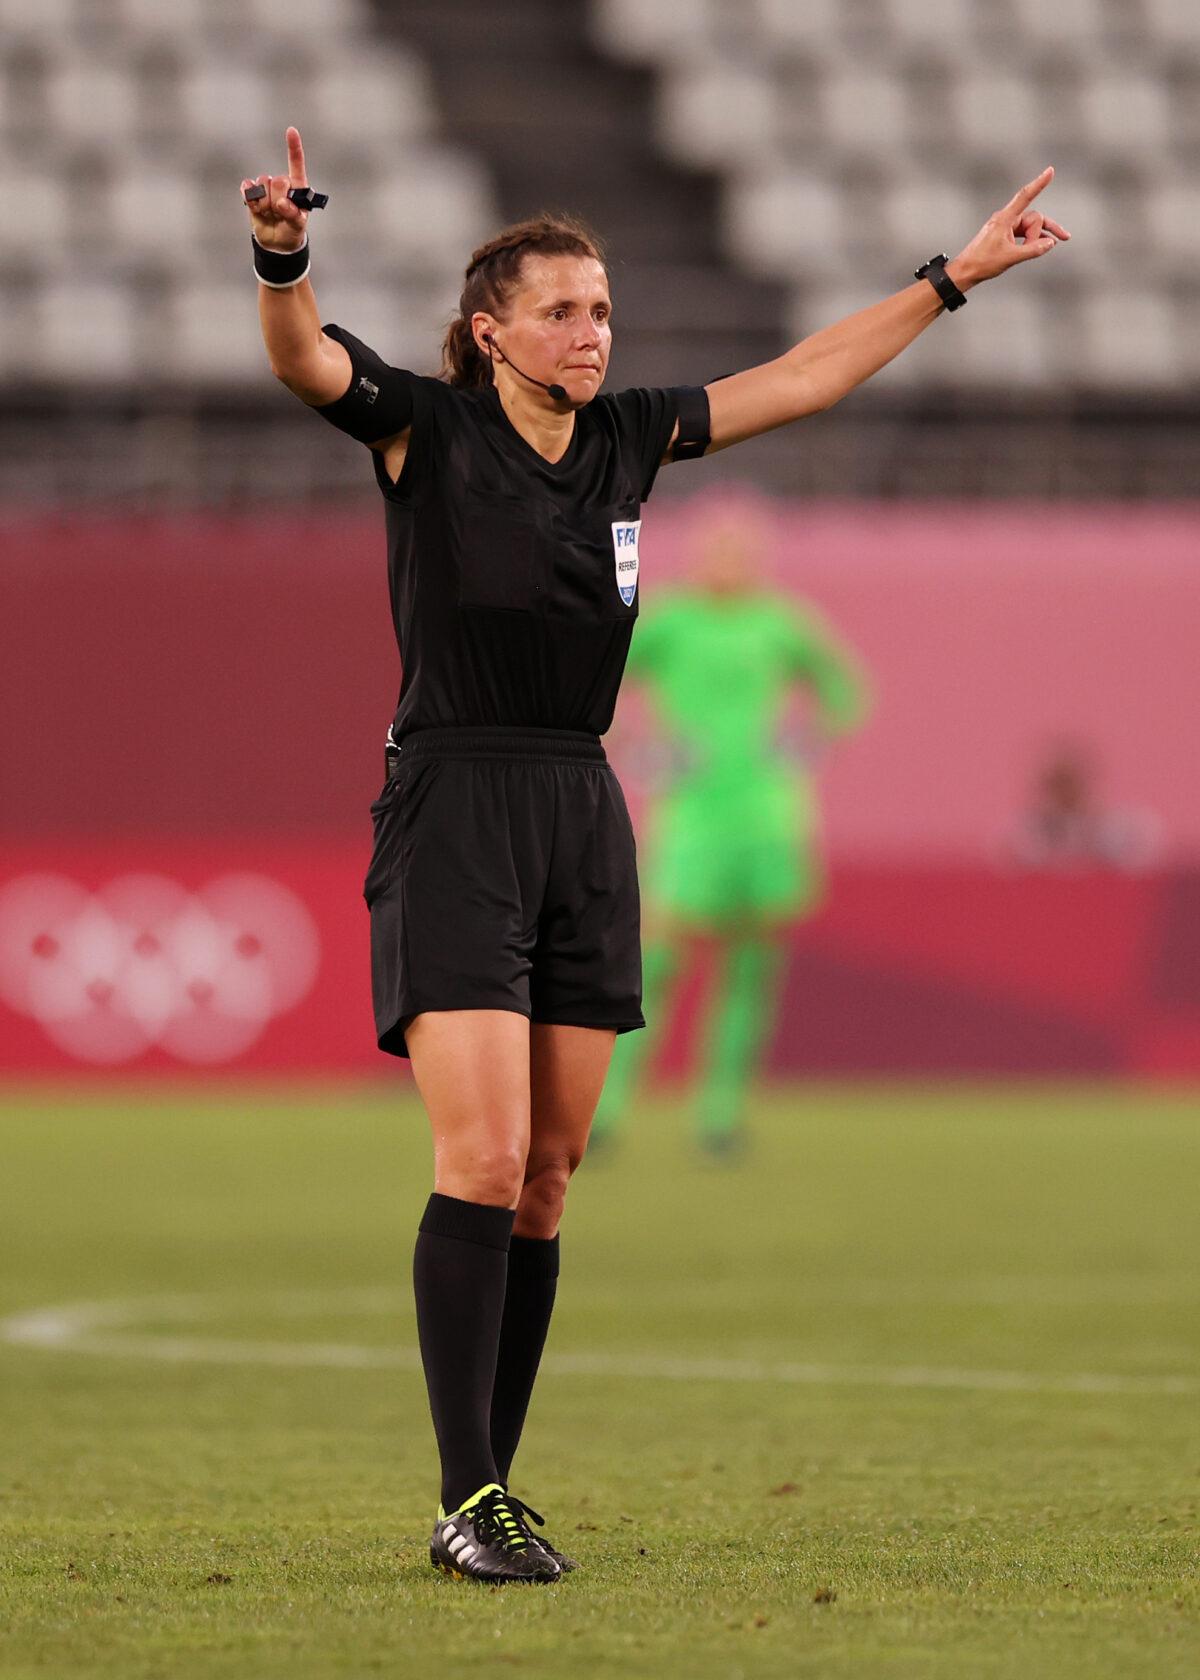 Match referee Kateryna Monzul signals for a video review check for a potential penalty for Team Canada during the women's soccer semifinal match between the USA and Canada on day 10 of the Tokyo Olympic Games at Kashima Stadium in Kashima, Ibaraki, on Aug. 2, 2021. (Naomi Baker/Getty Images)